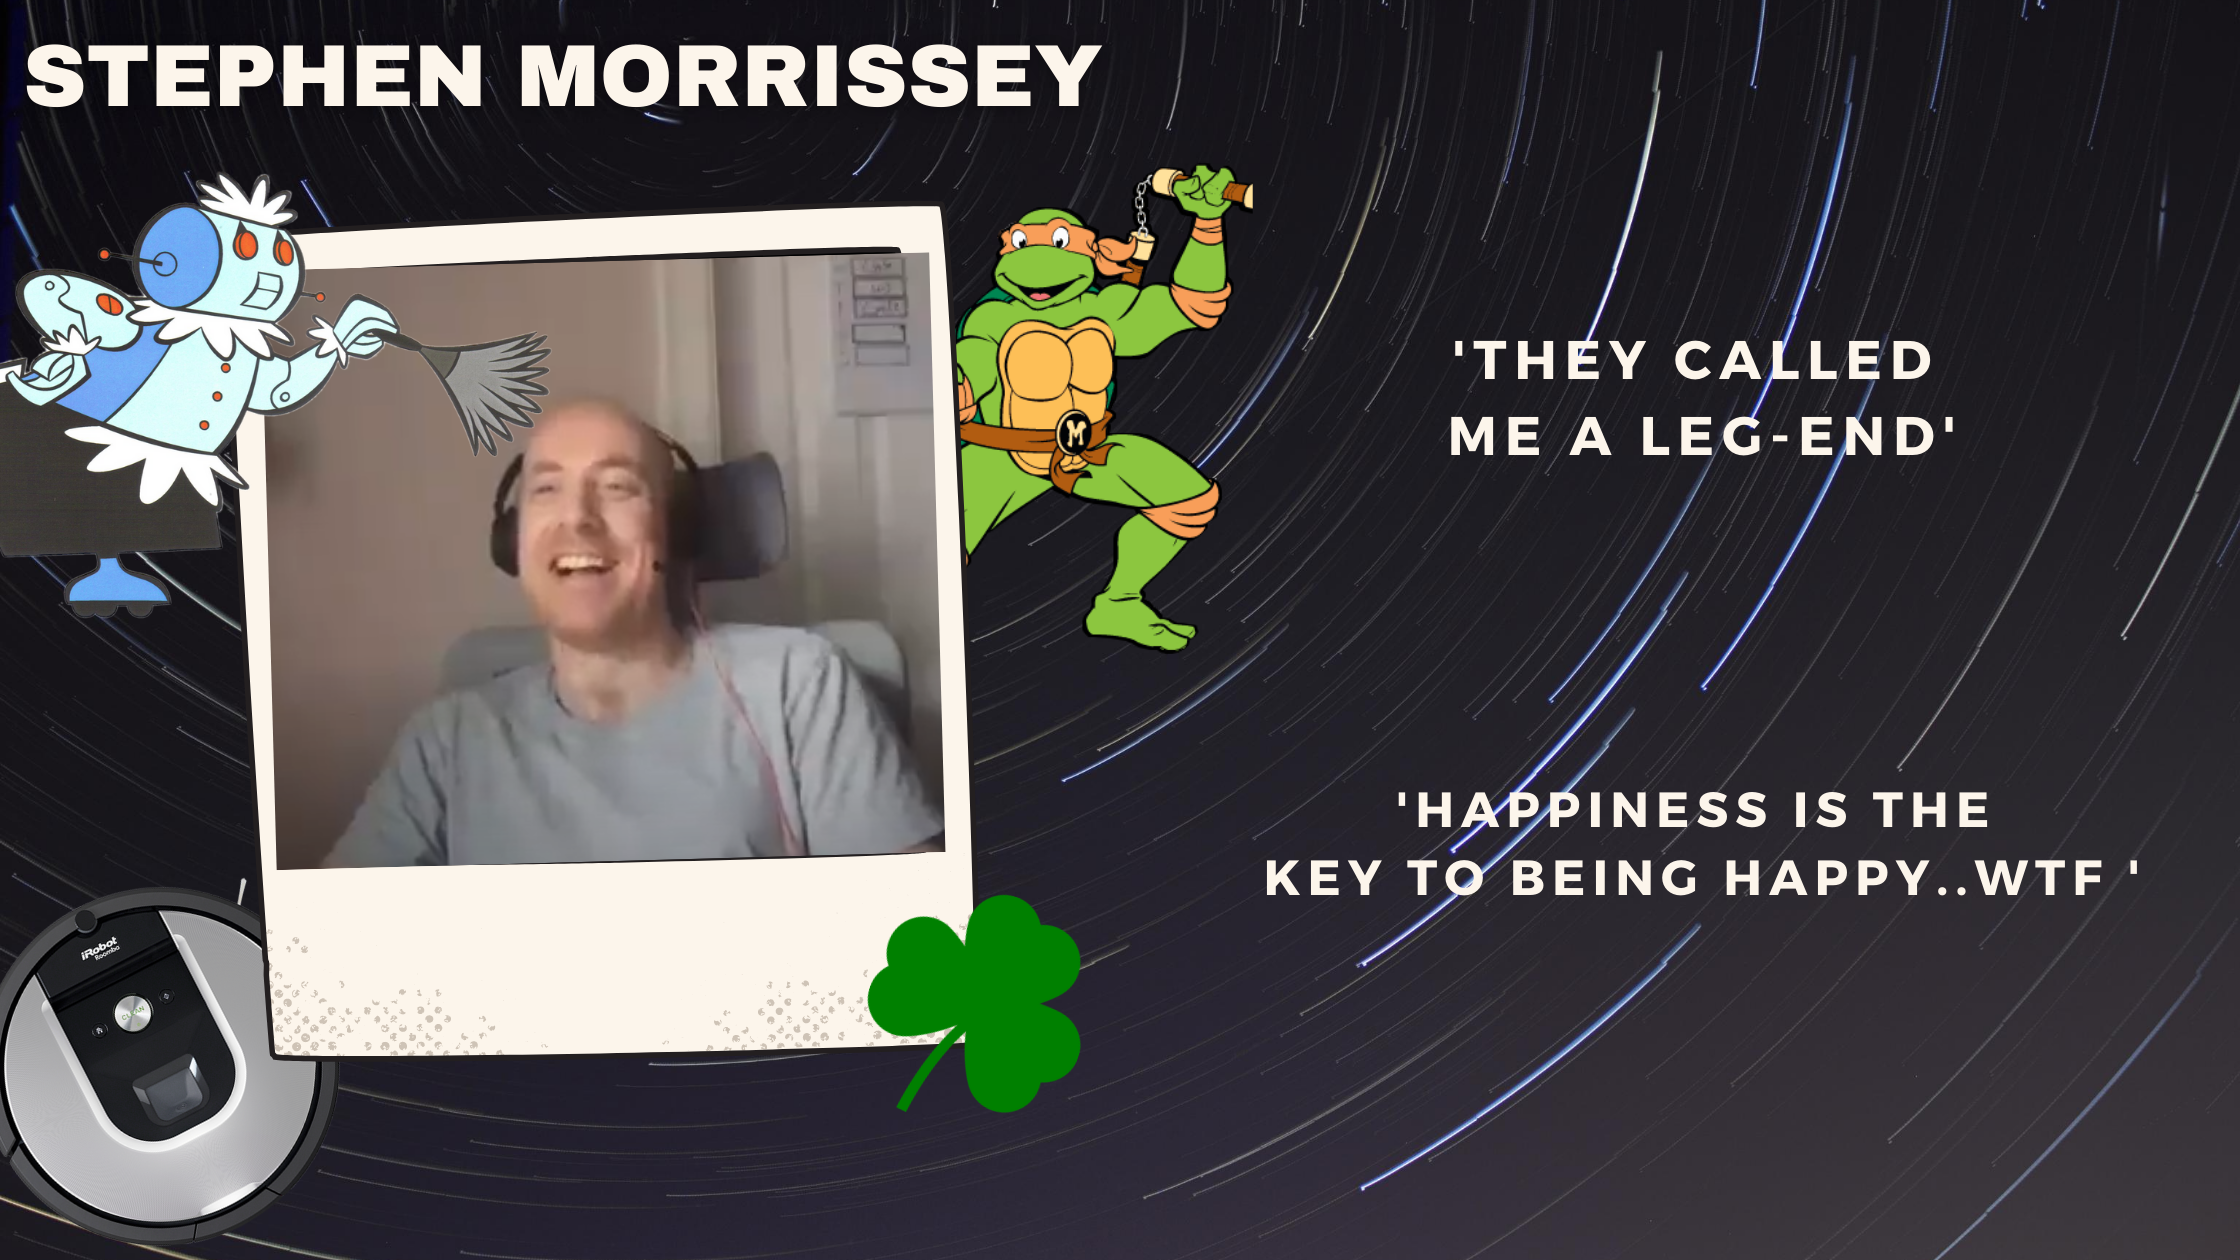 Stephen Morrissey - Happiness is the key to being happy...wtf